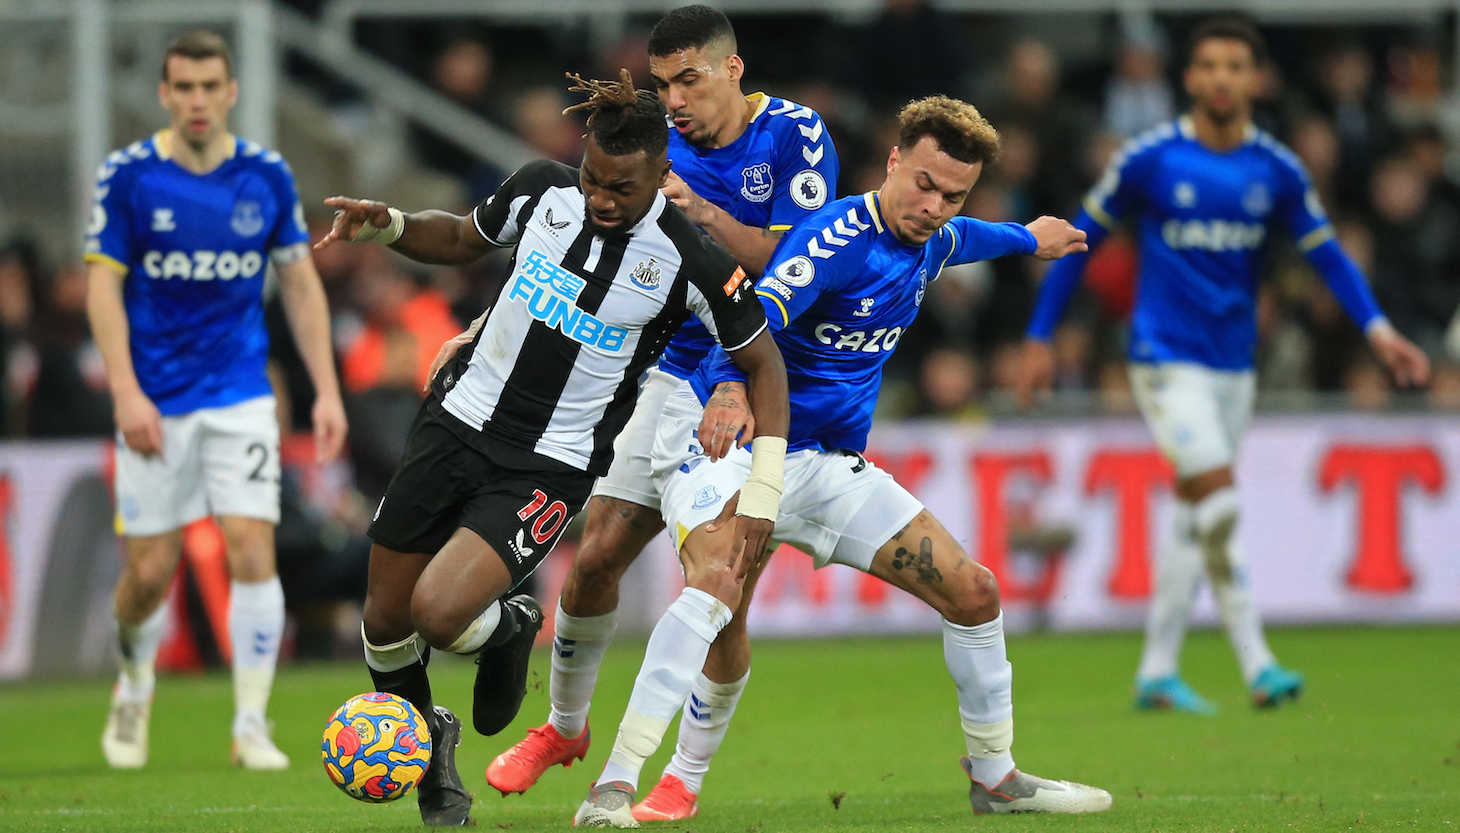 Newcastle United's French midfielder Allan Saint-Maximin (2nd L) vies with Everton's English midfielder Dele Alli (2nd R) during the English Premier League football match between Newcastle United and Everton at St James' Park in Newcastle-upon-Tyne, north east England on February 8, 2022.